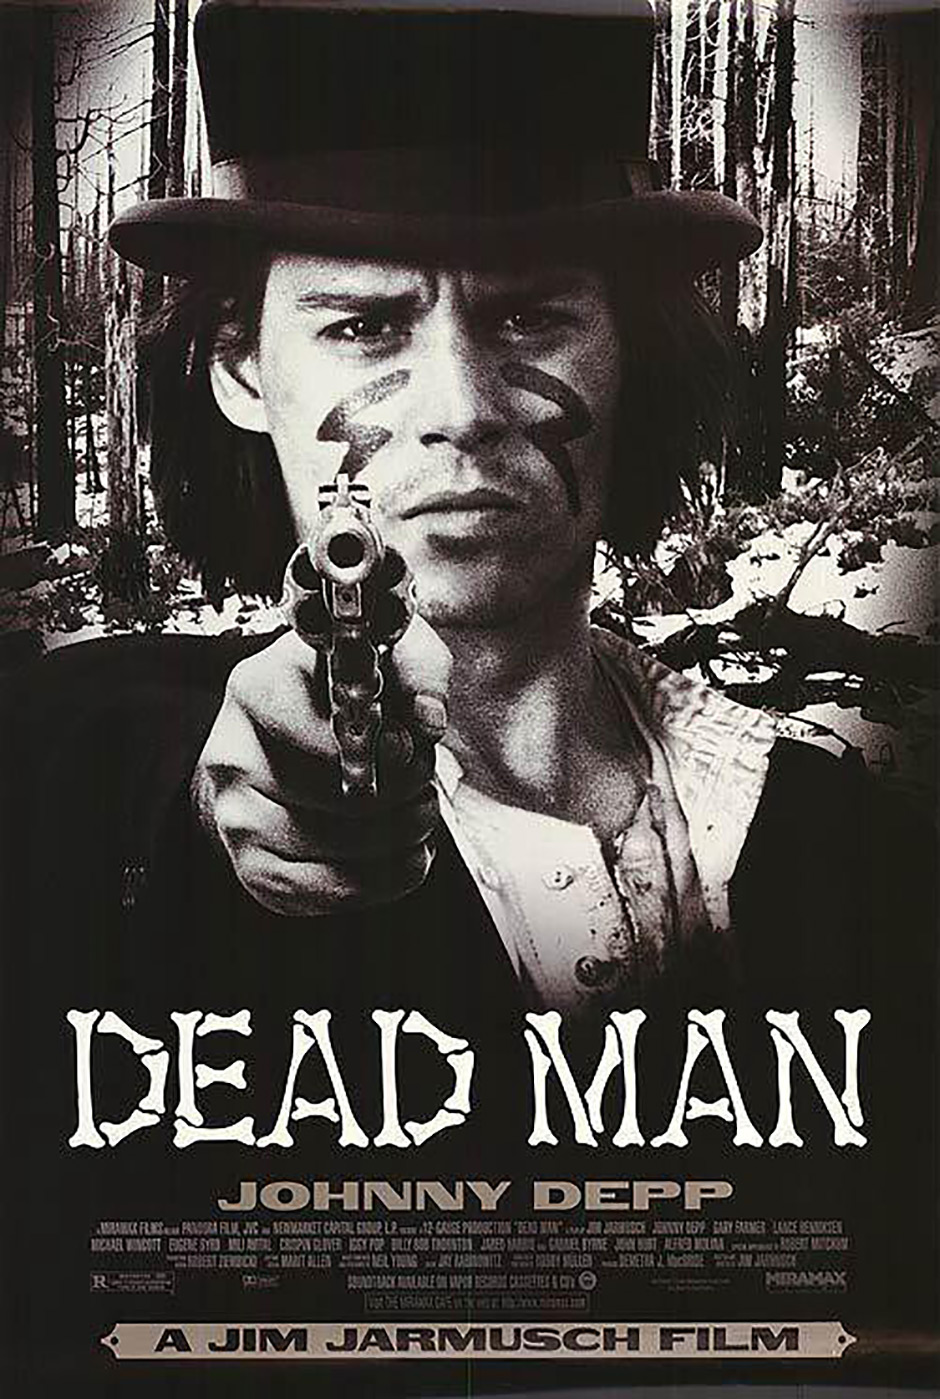 Isolation Station: Tommy Guerrero. Dead Man by Jim Jarmusch